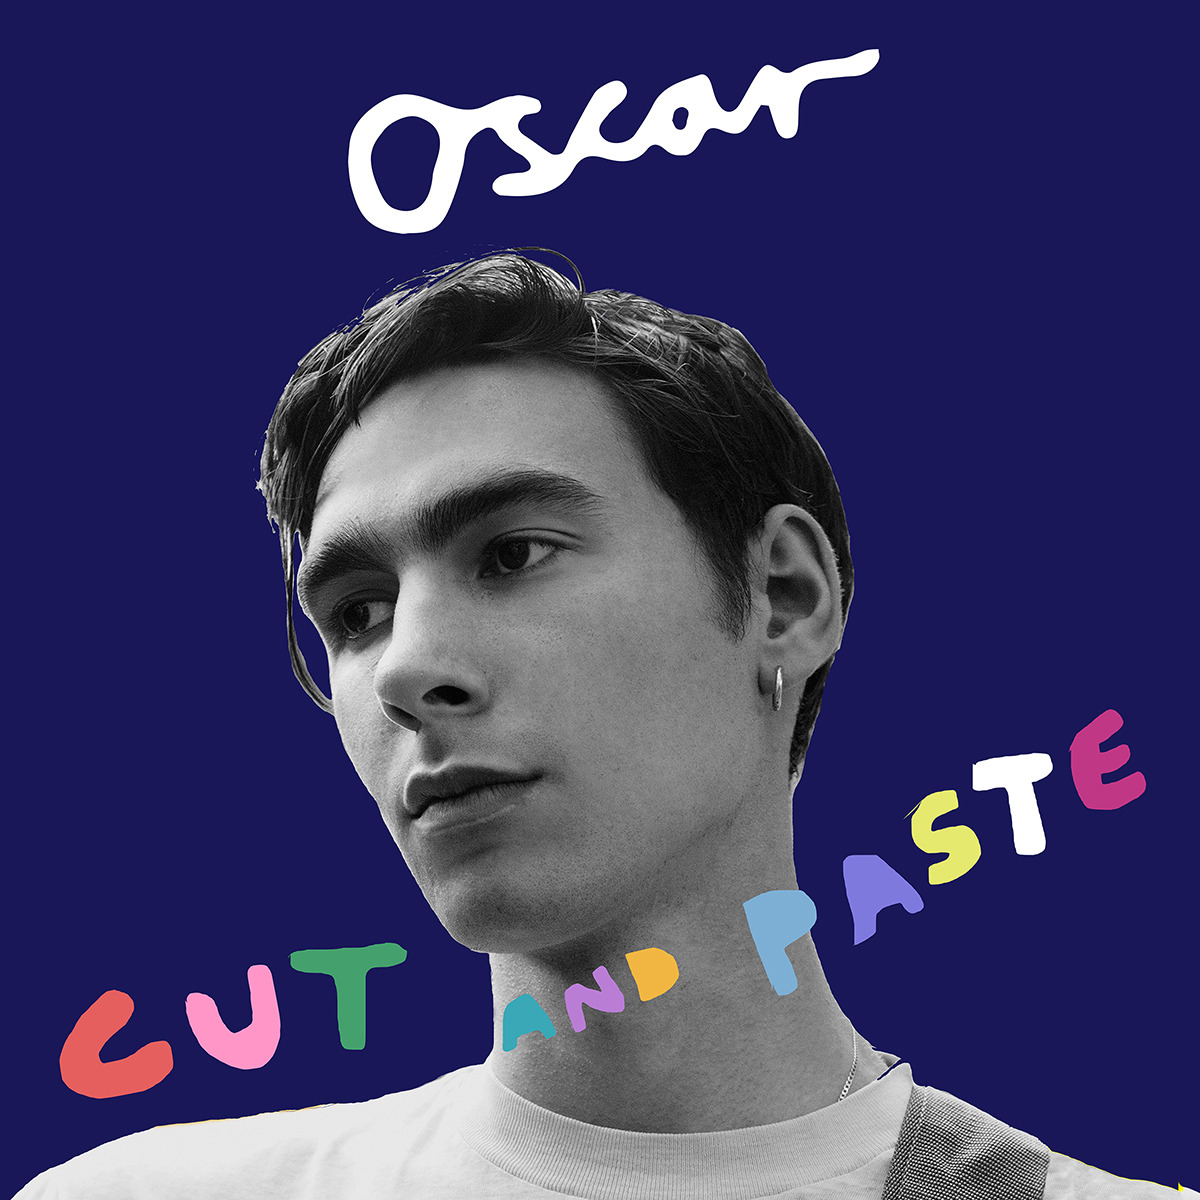 My debut album ‘Cut and Paste’ is out on 13th May! but you can pre-order it now at these fine retailers, and there are exclusive shirts and stickers available at my store. Pre-order bundles at my official store: smarturl.it/oscarcandp Pre-order at...